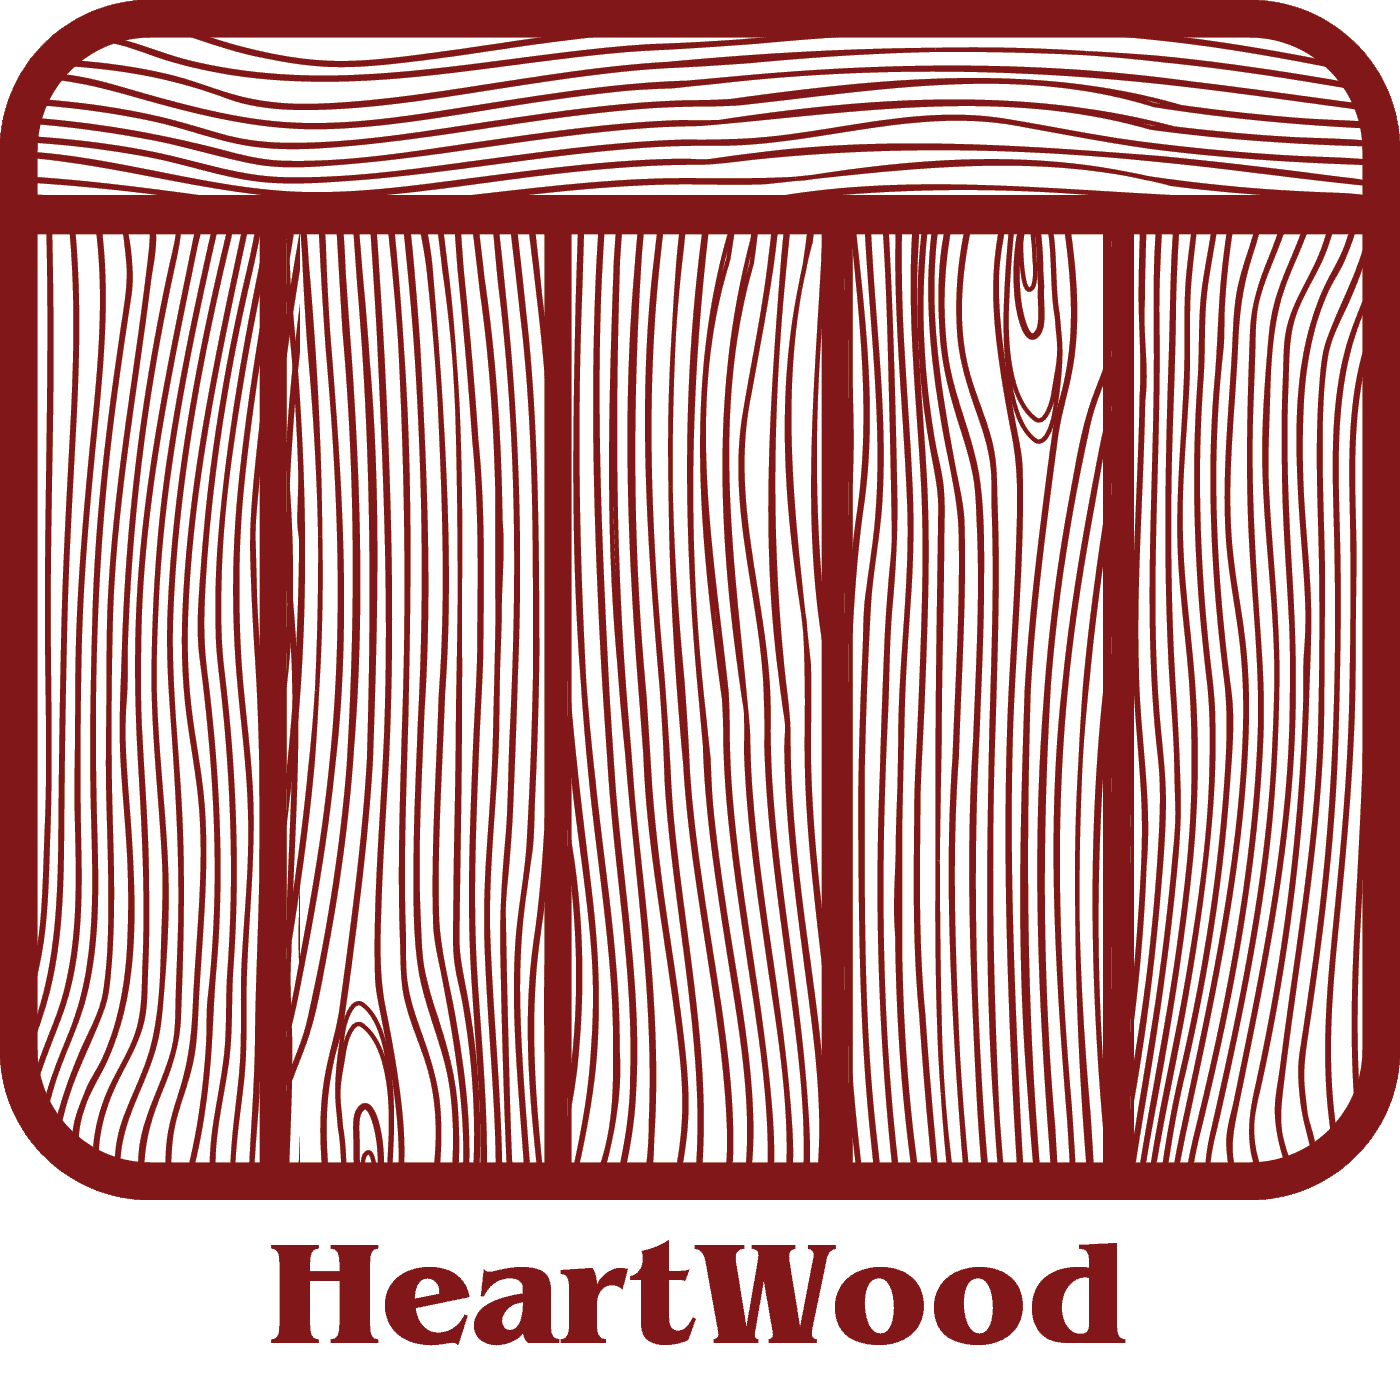 https://www.superiorfenceandrail.com/wp-content/uploads/2019/05/Heartwood-1.png